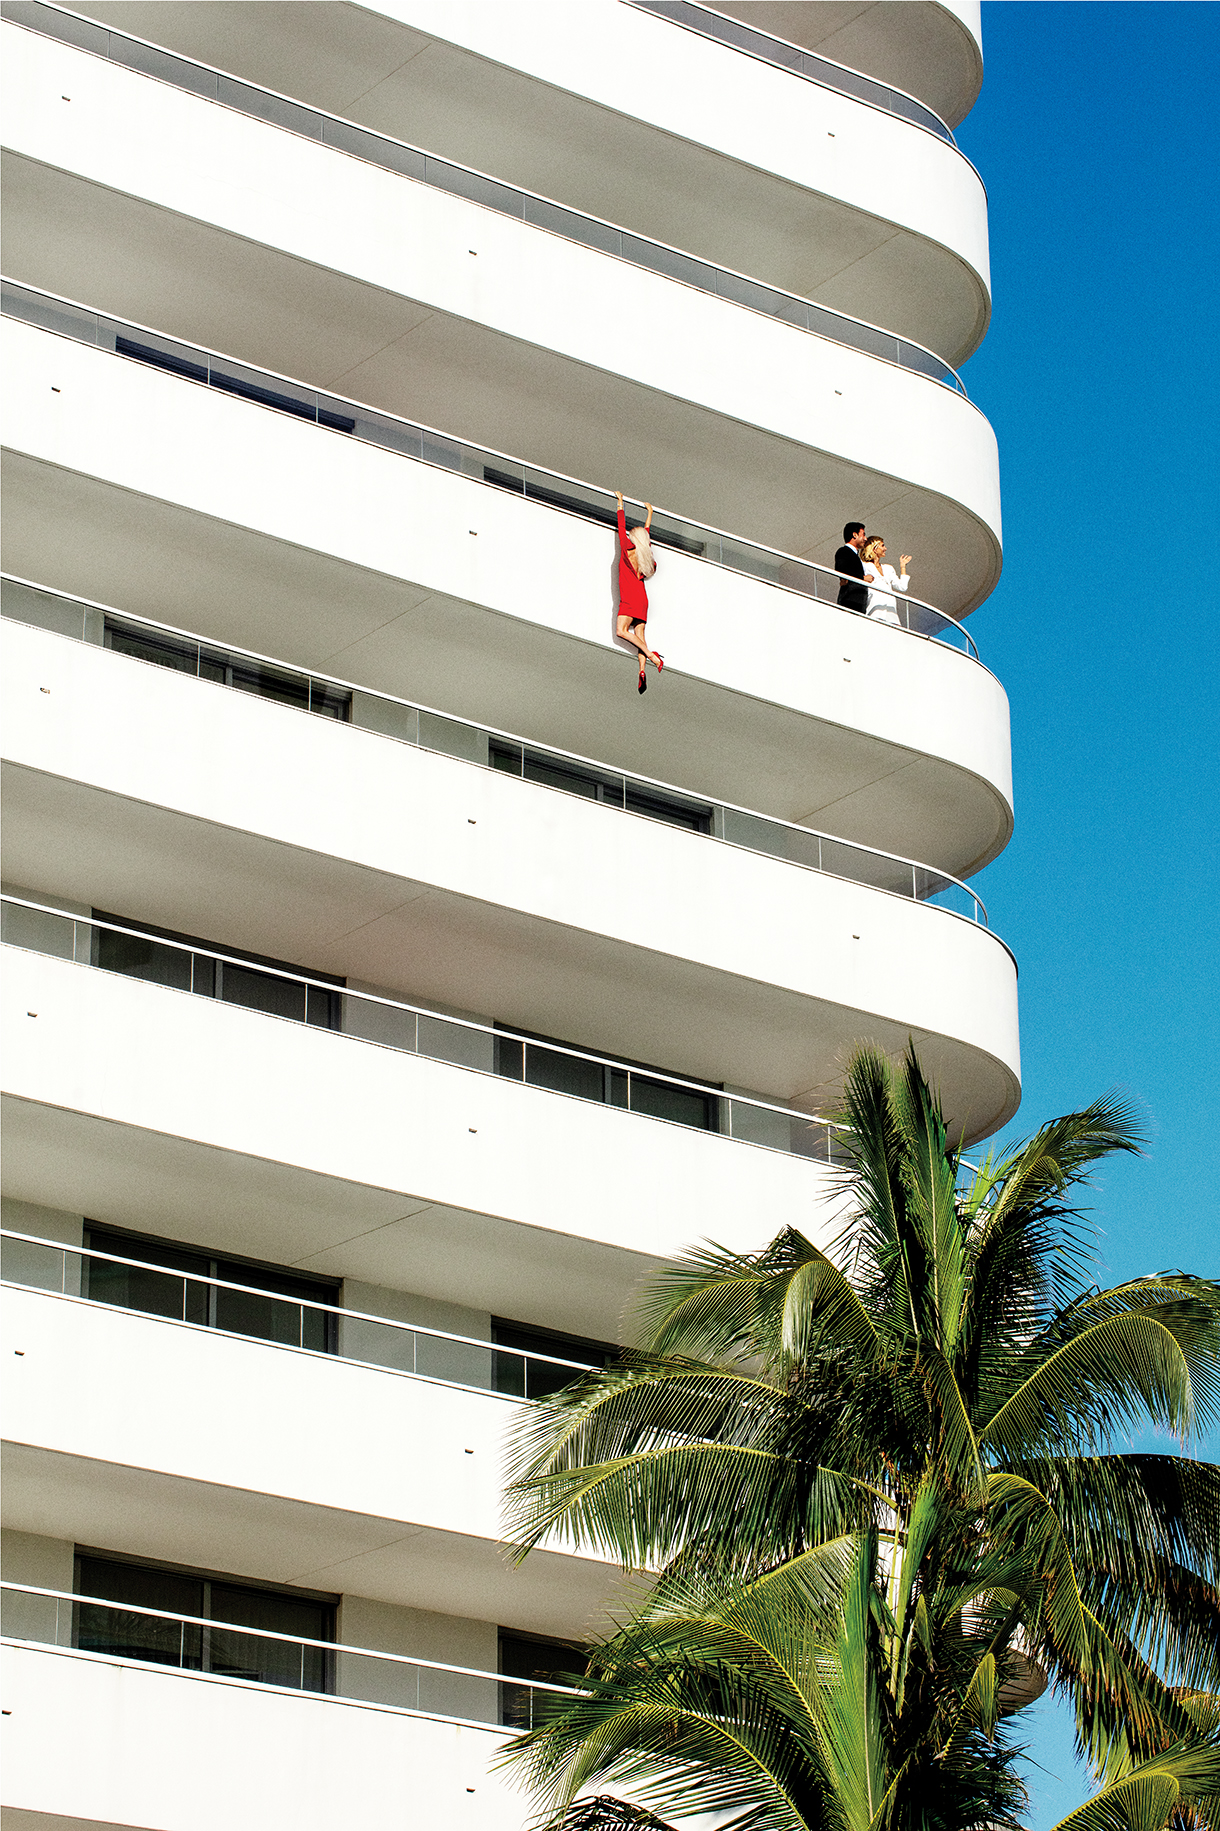 Woman in red dress hanging from a Miami skyrise balcony